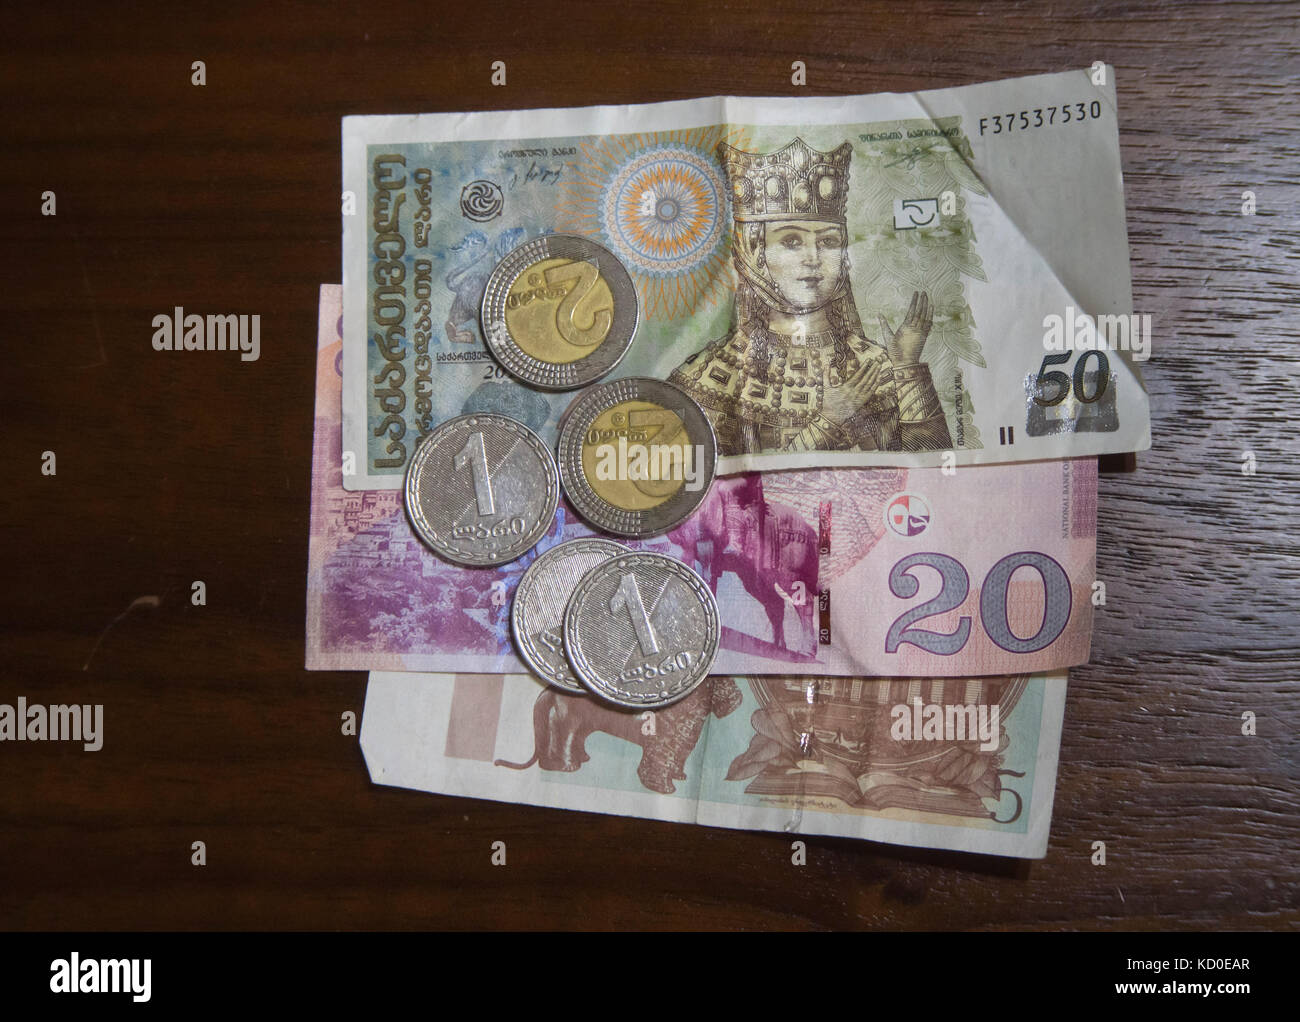 Georgian lari banknotes and coins on tabletop Stock Photo